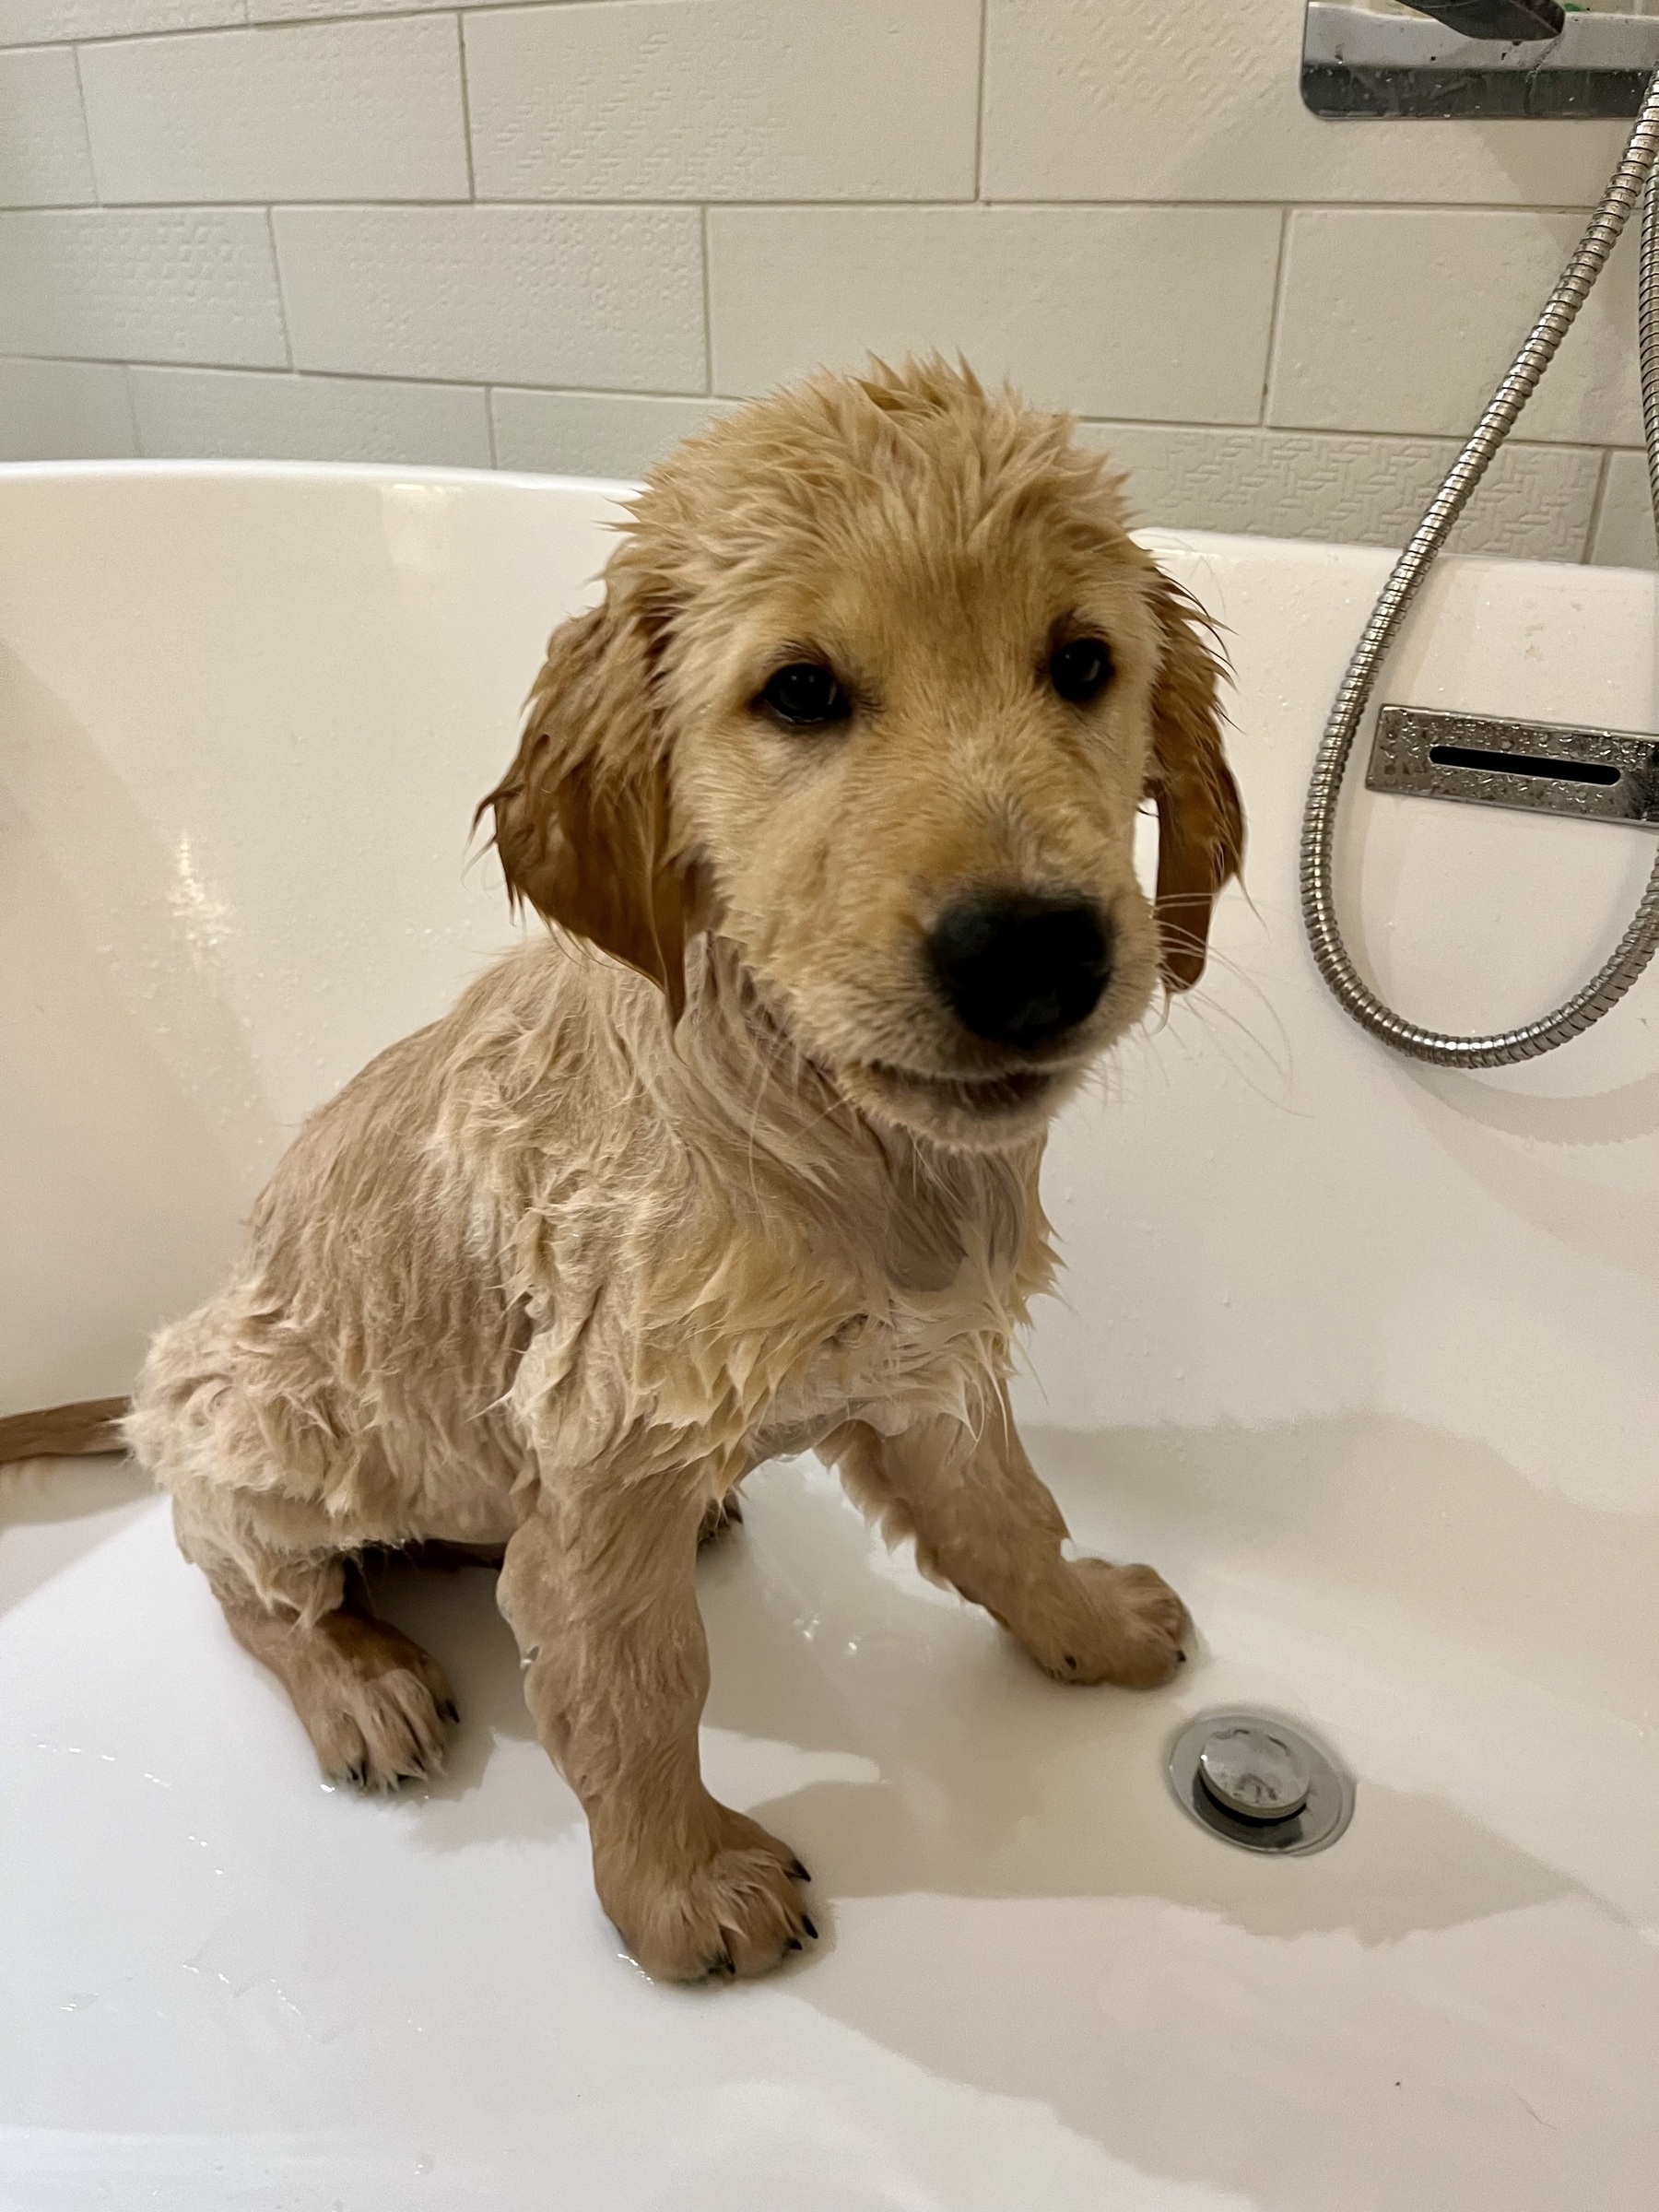 A wet, young Golden Retriever is sitting in a bathtub.